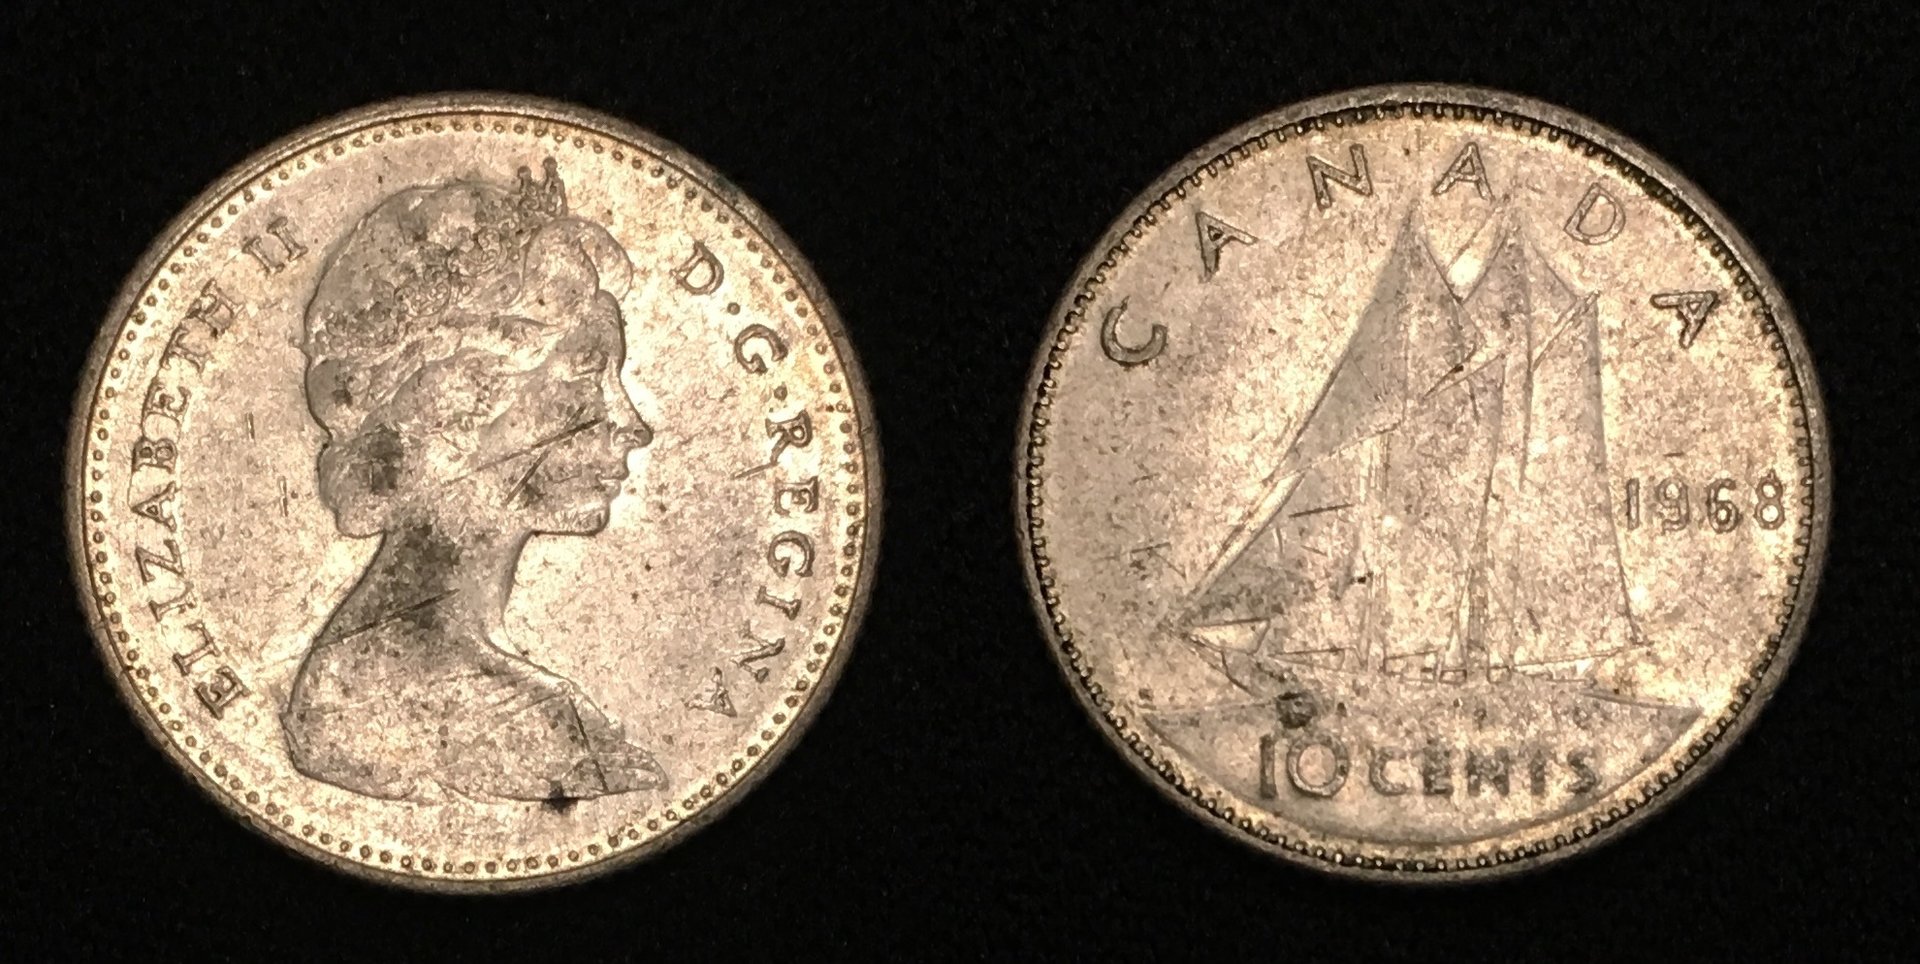 1968 10 Cents Combined.jpg